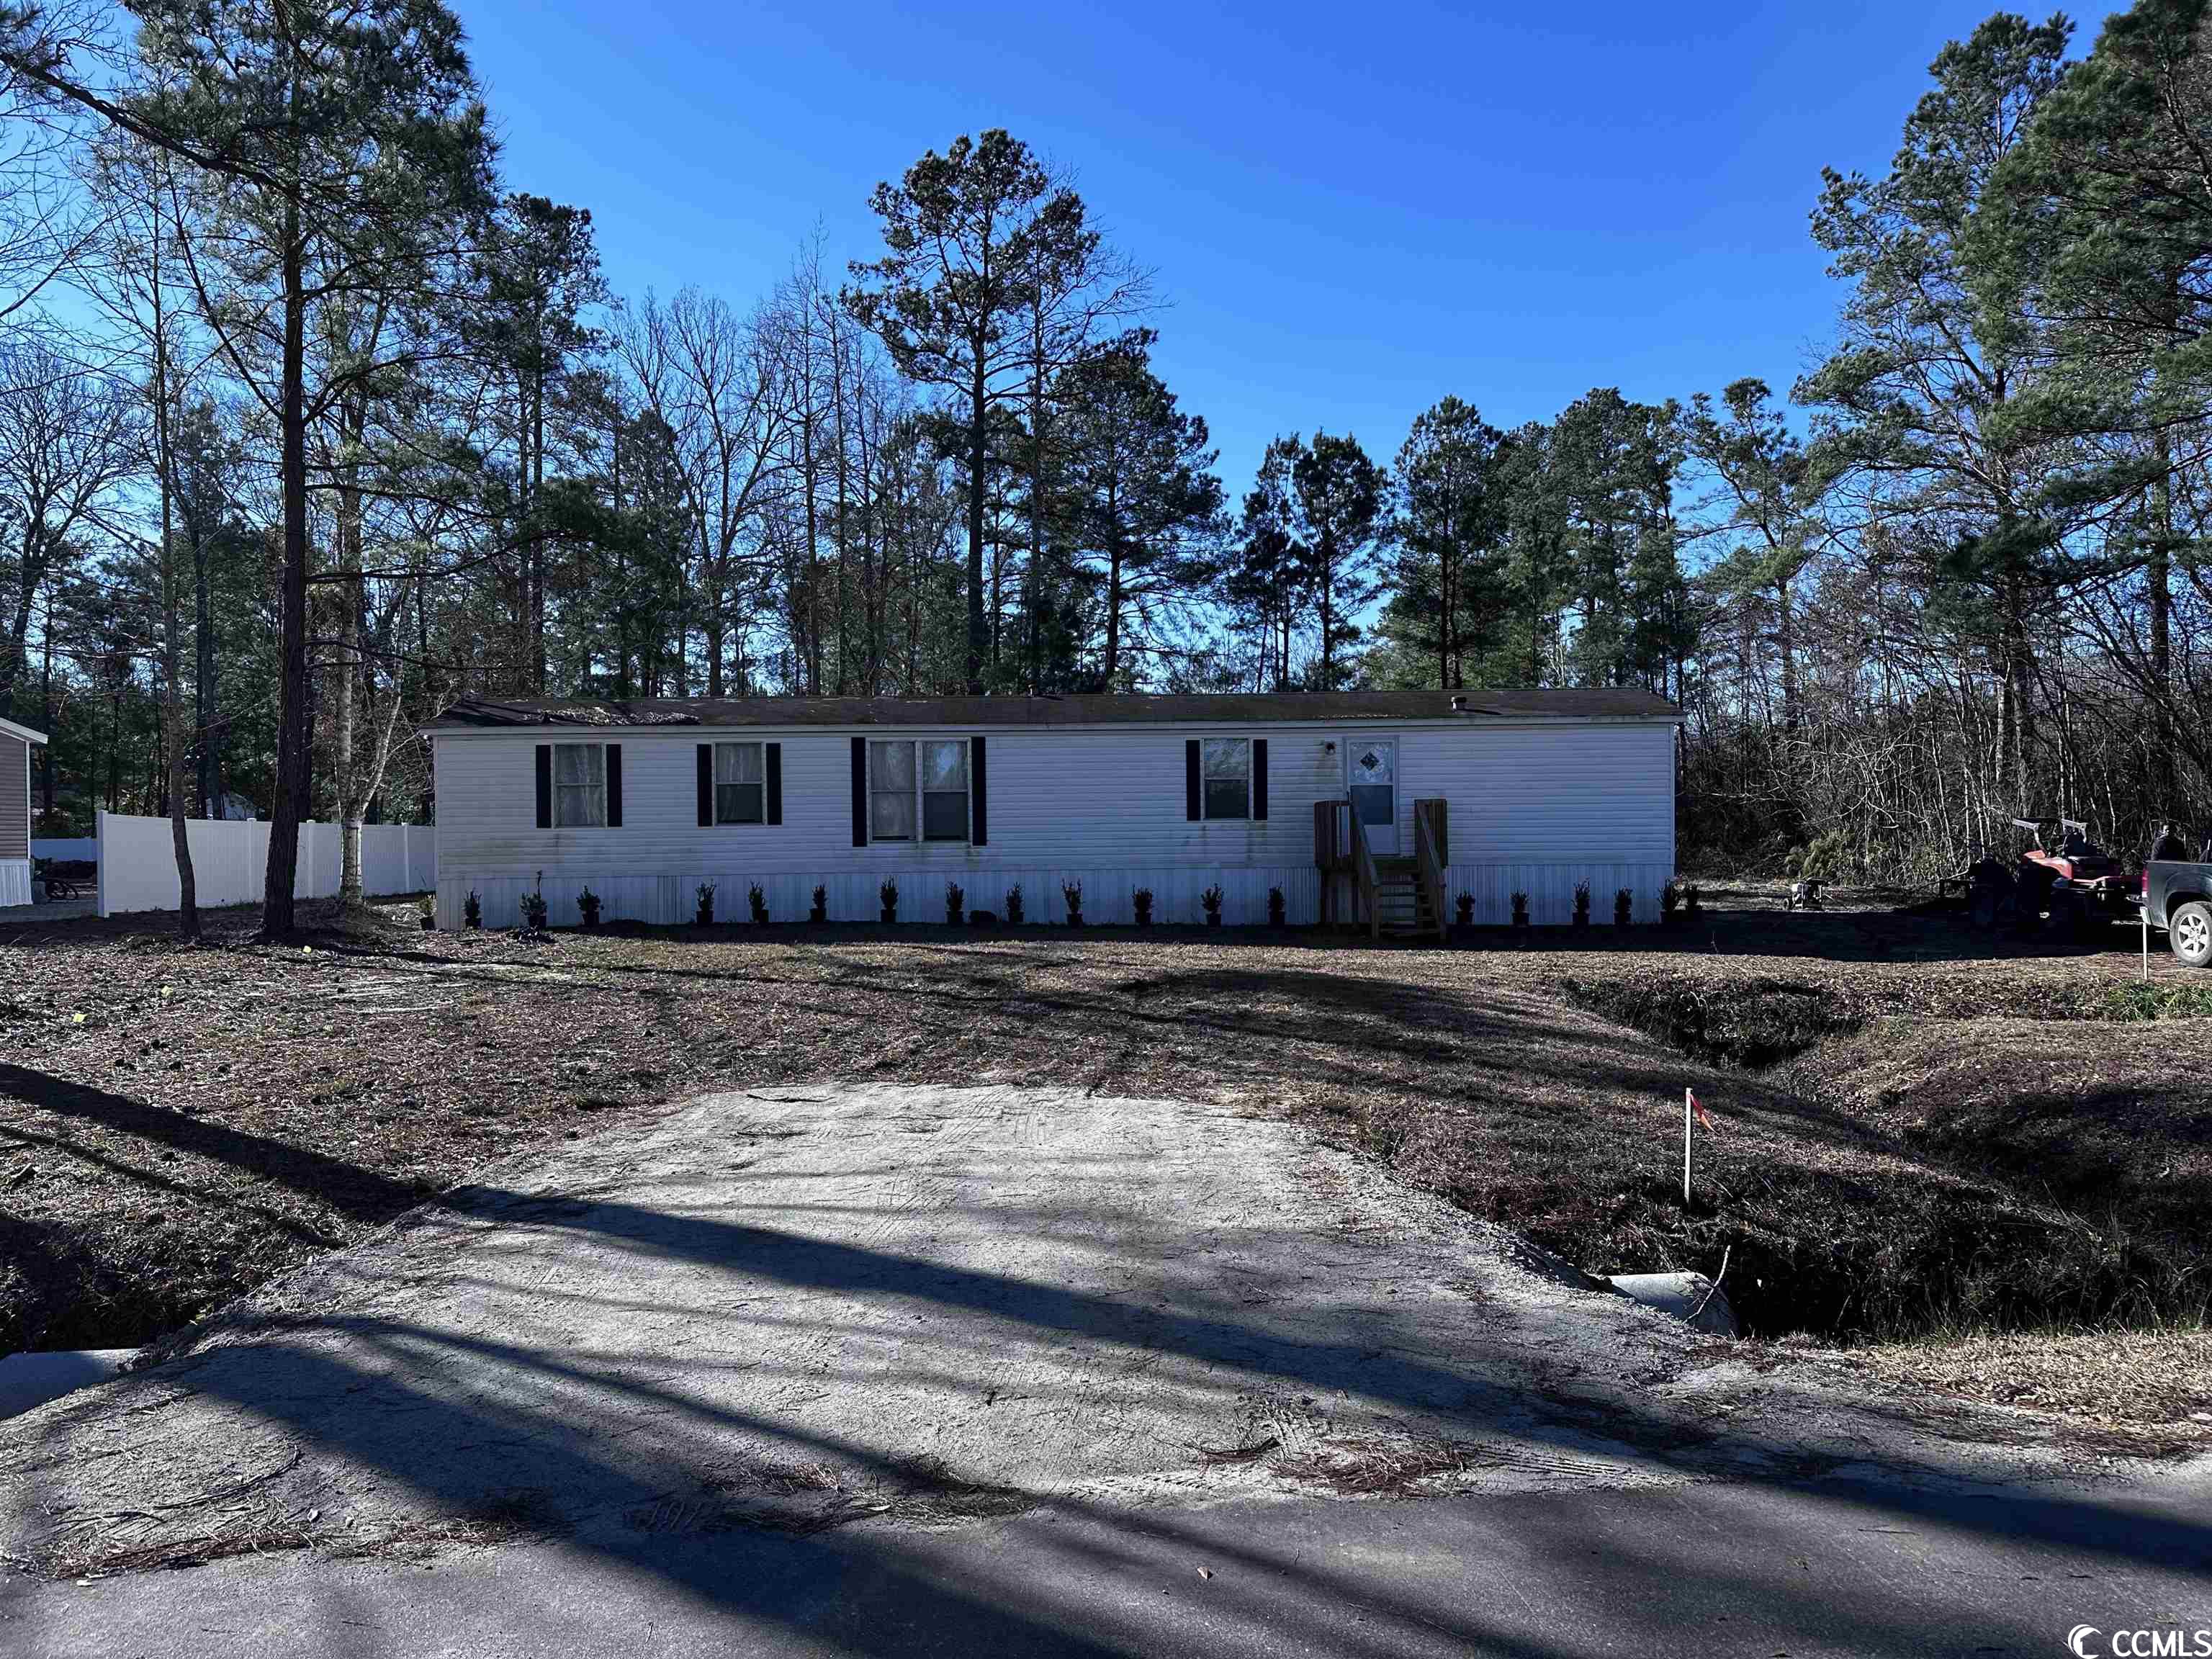 just remodeled. new roof, paint, flooring and much more. excellent condition. looking for home on a 1/2 acre lot? this is for you. just remodeled home close to historic downtown conway and minutes from the beach. owner is a licensed sc realtor.